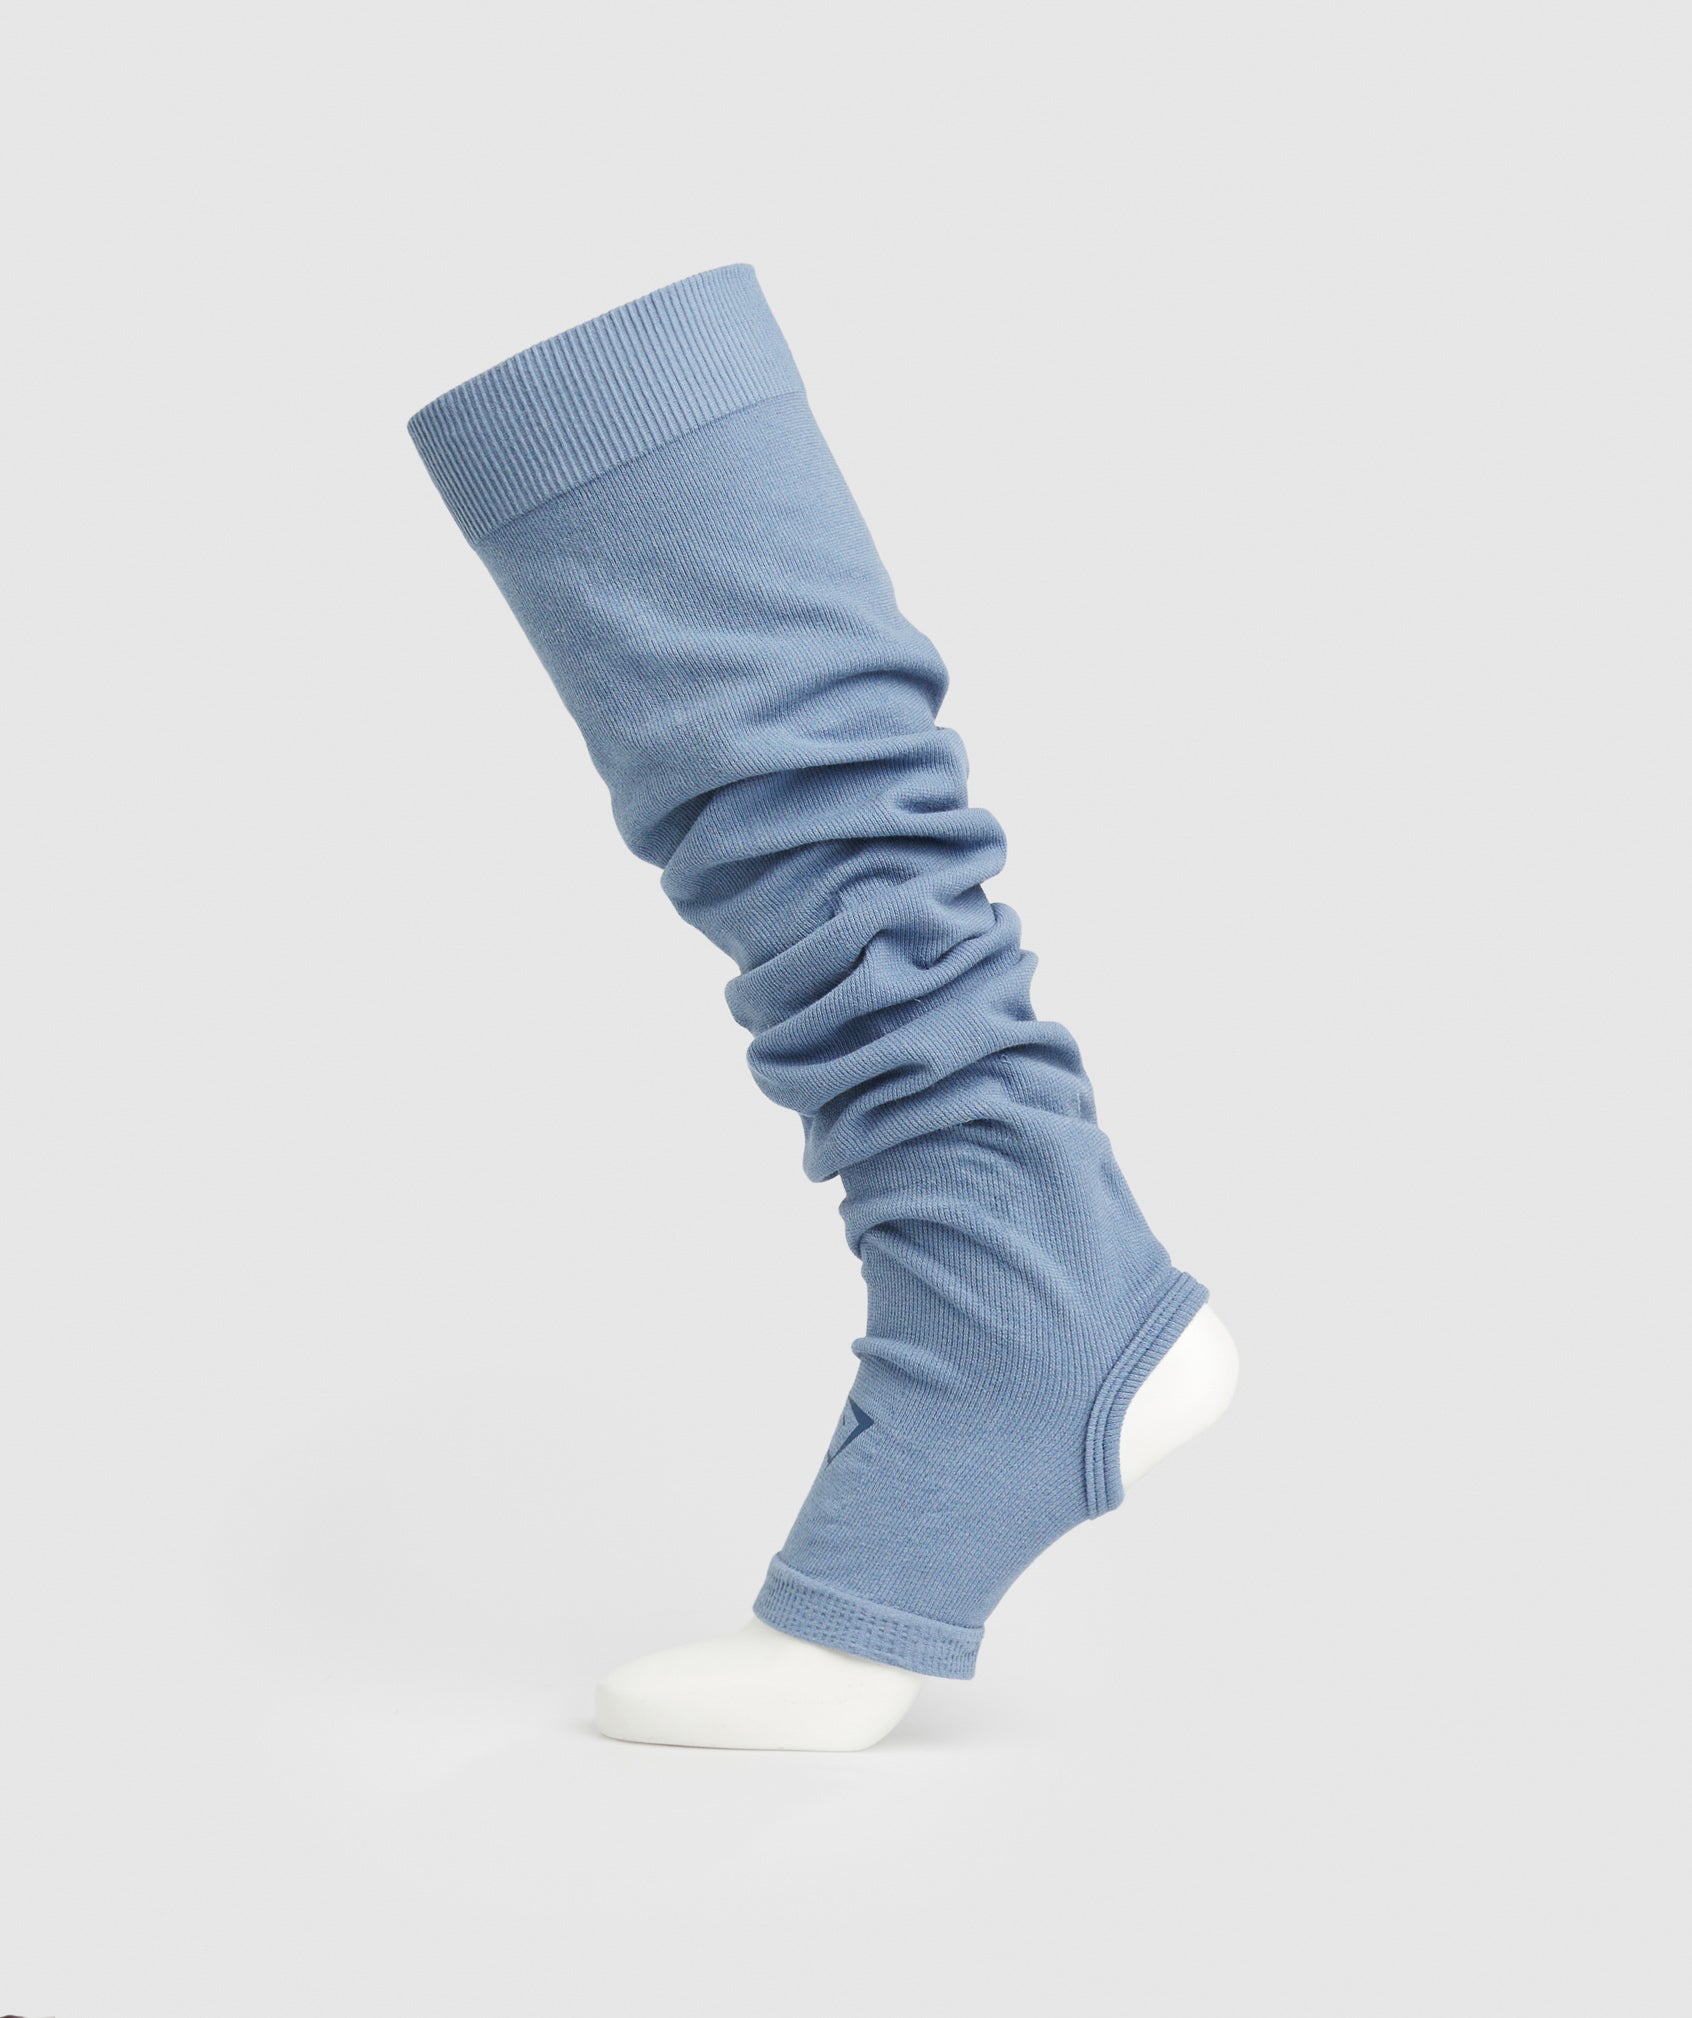 Ribbed Cotton Seamless Leg Warmers in Faded Blue